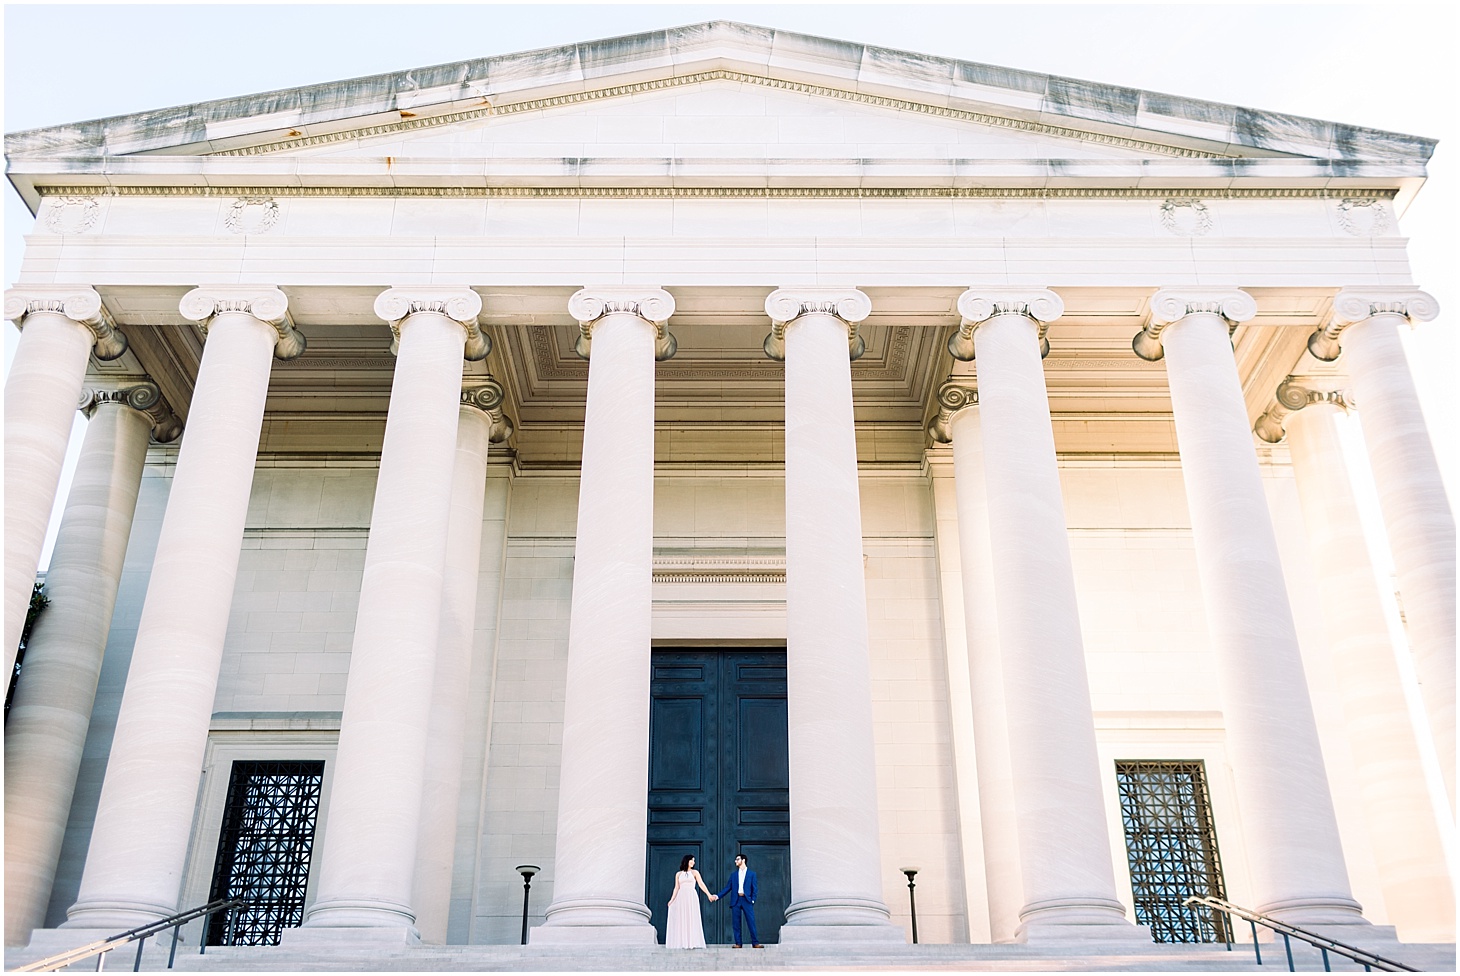 Engagement Portraits at the National Gallery of Art | Romantic Sunrise Engagement Session at the Smithsonian Gardens | Sarah Bradshaw Photography